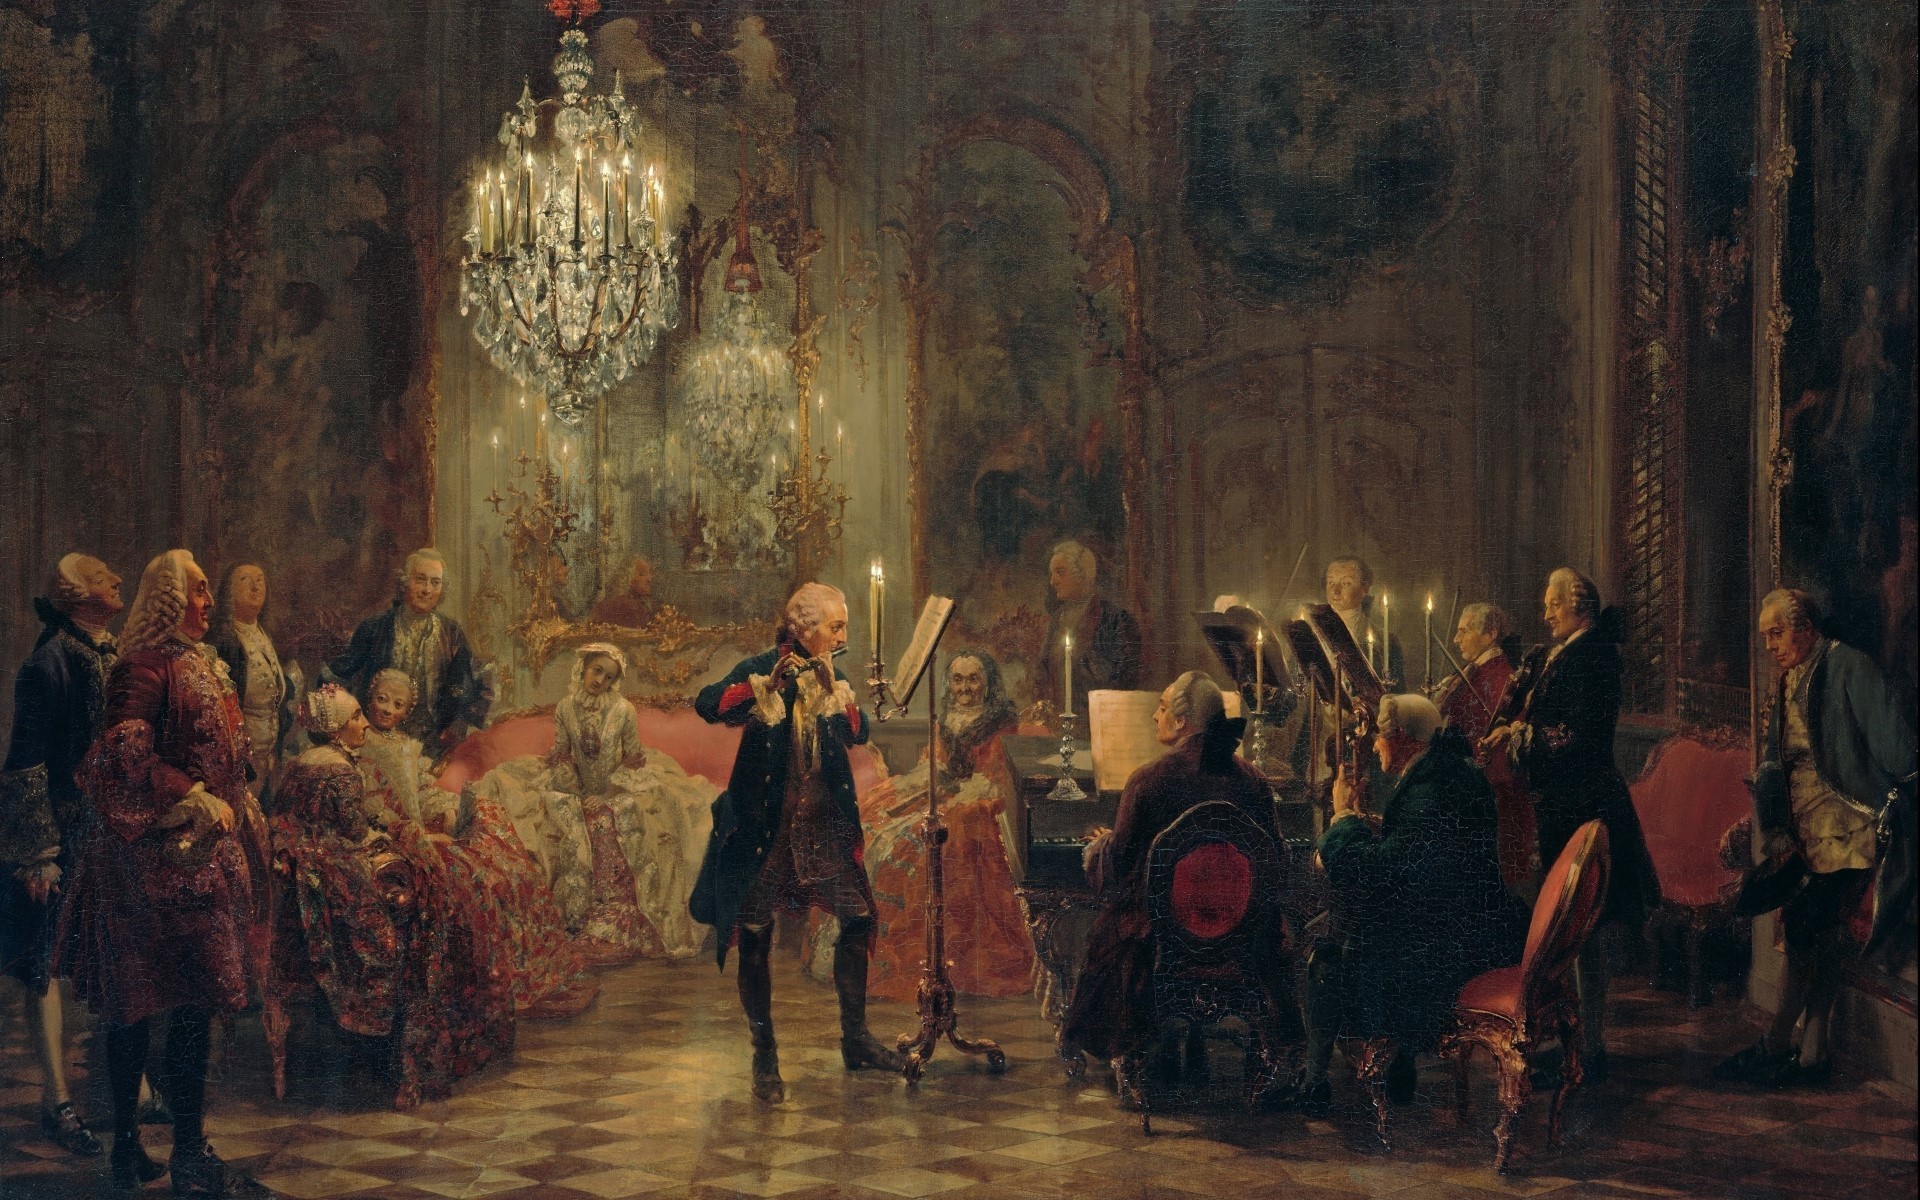 Painting Artwork Prussia Concerts King Oil Painting Classic Art Chandeliers Musician Flute Piano Can 1920x1200